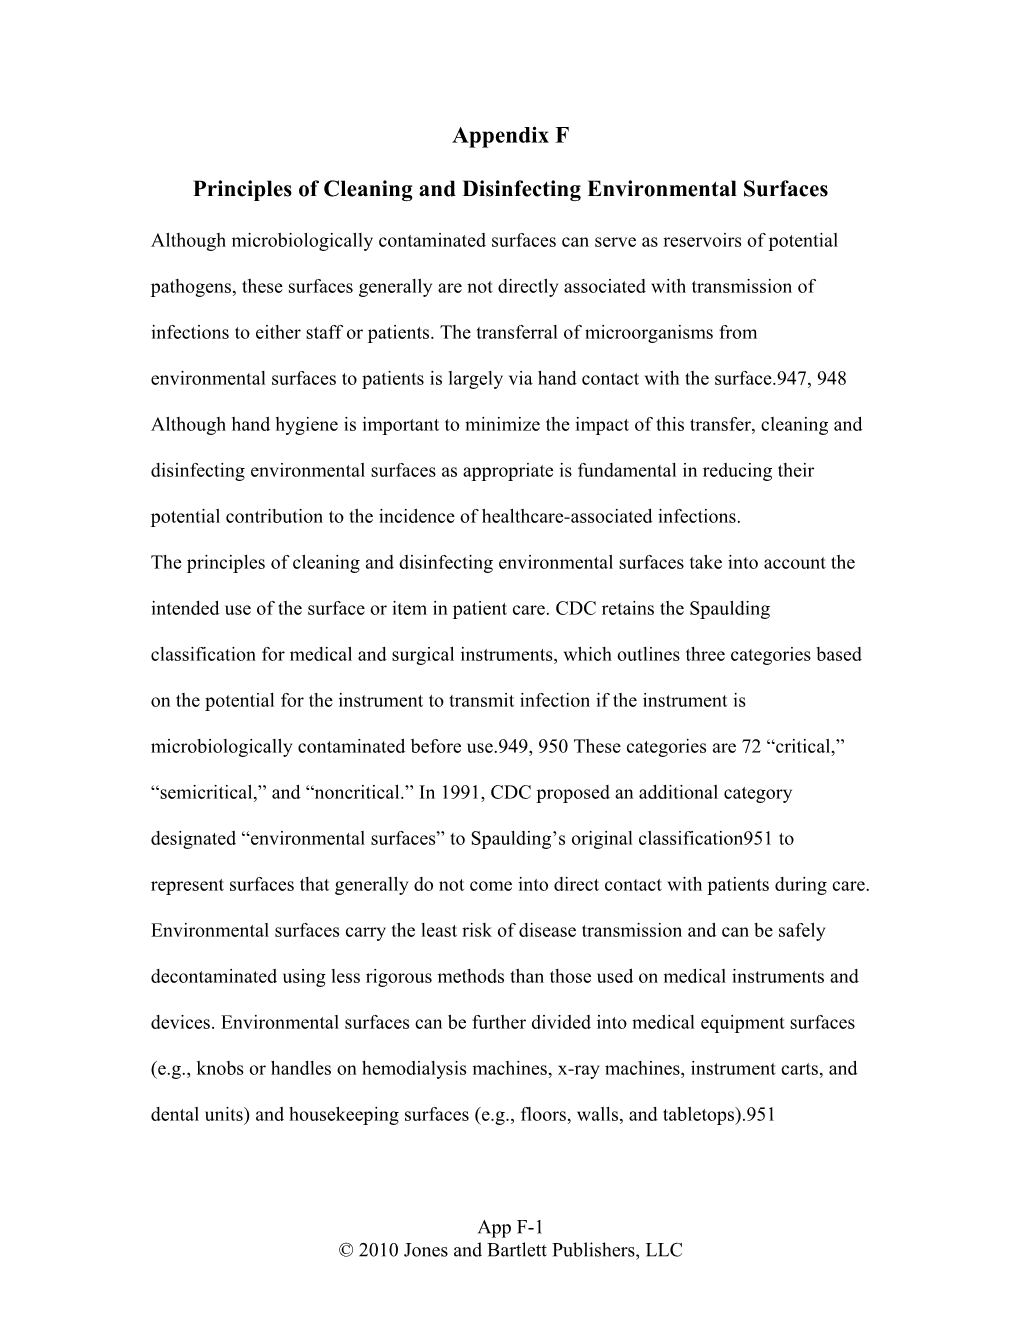 Principles of Cleaning and Disinfecting Environmental Surfaces